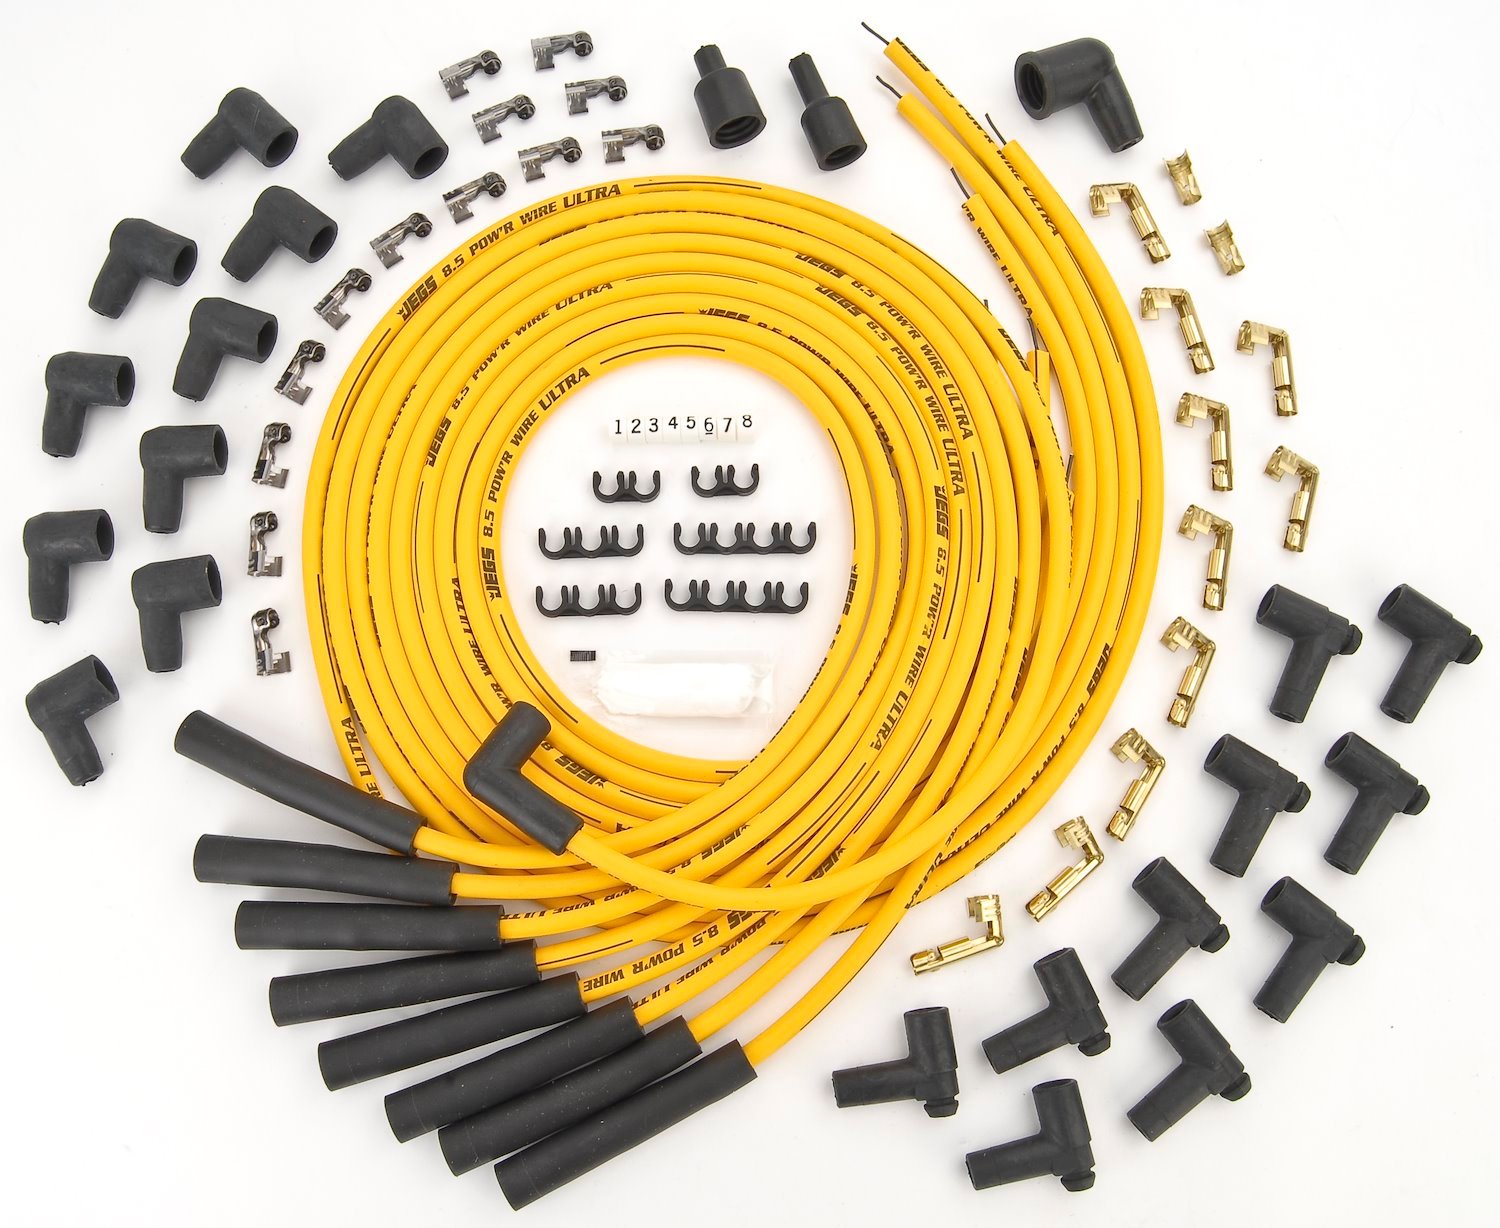 8.5mm Yellow Ultra Pow"r Wires Small & Big Block Chevy Over Valve Covers or Under Headers & AMC 290-401 V8 W/HEI